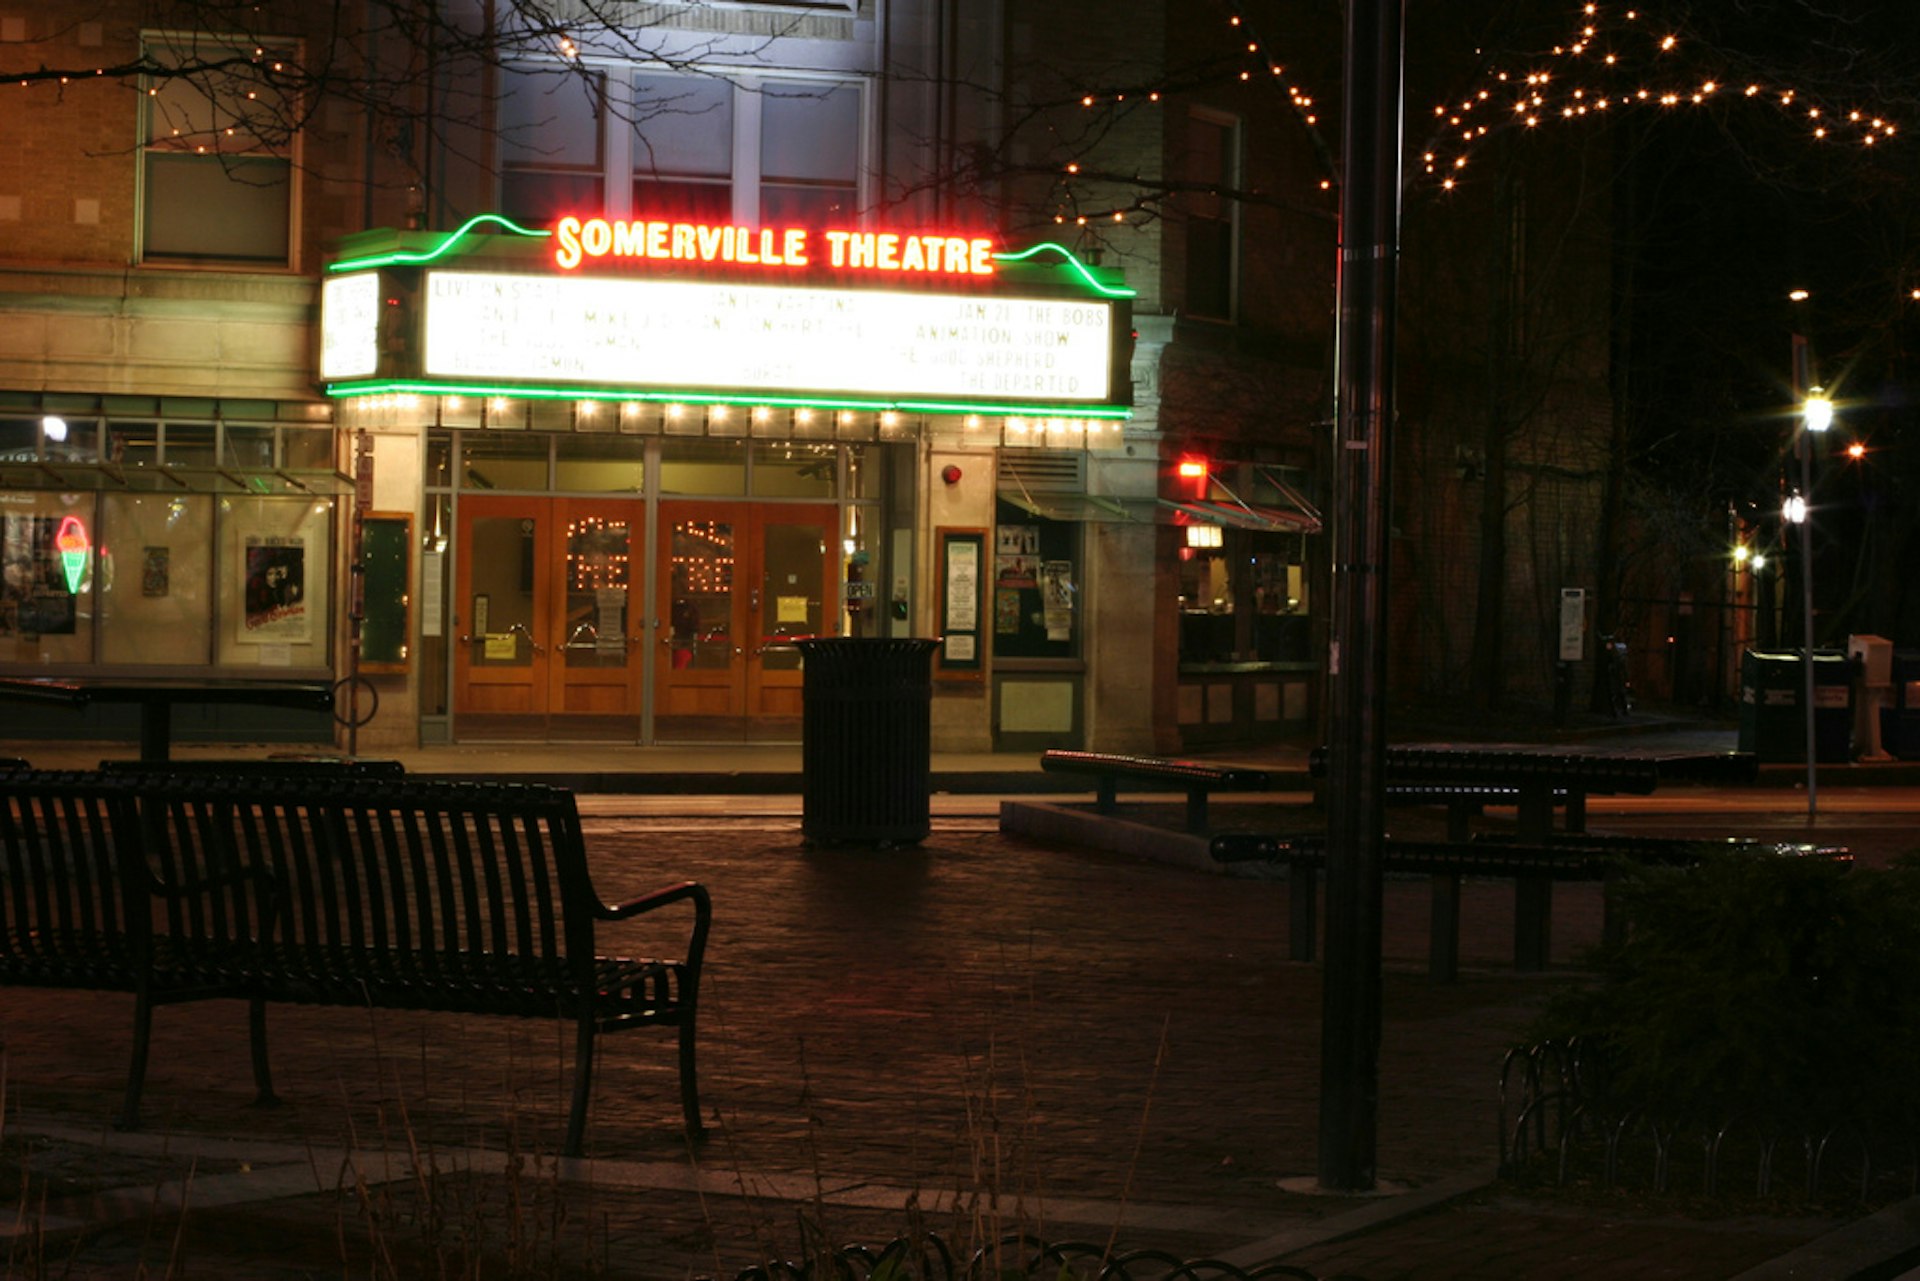 The Somerville Theatre.